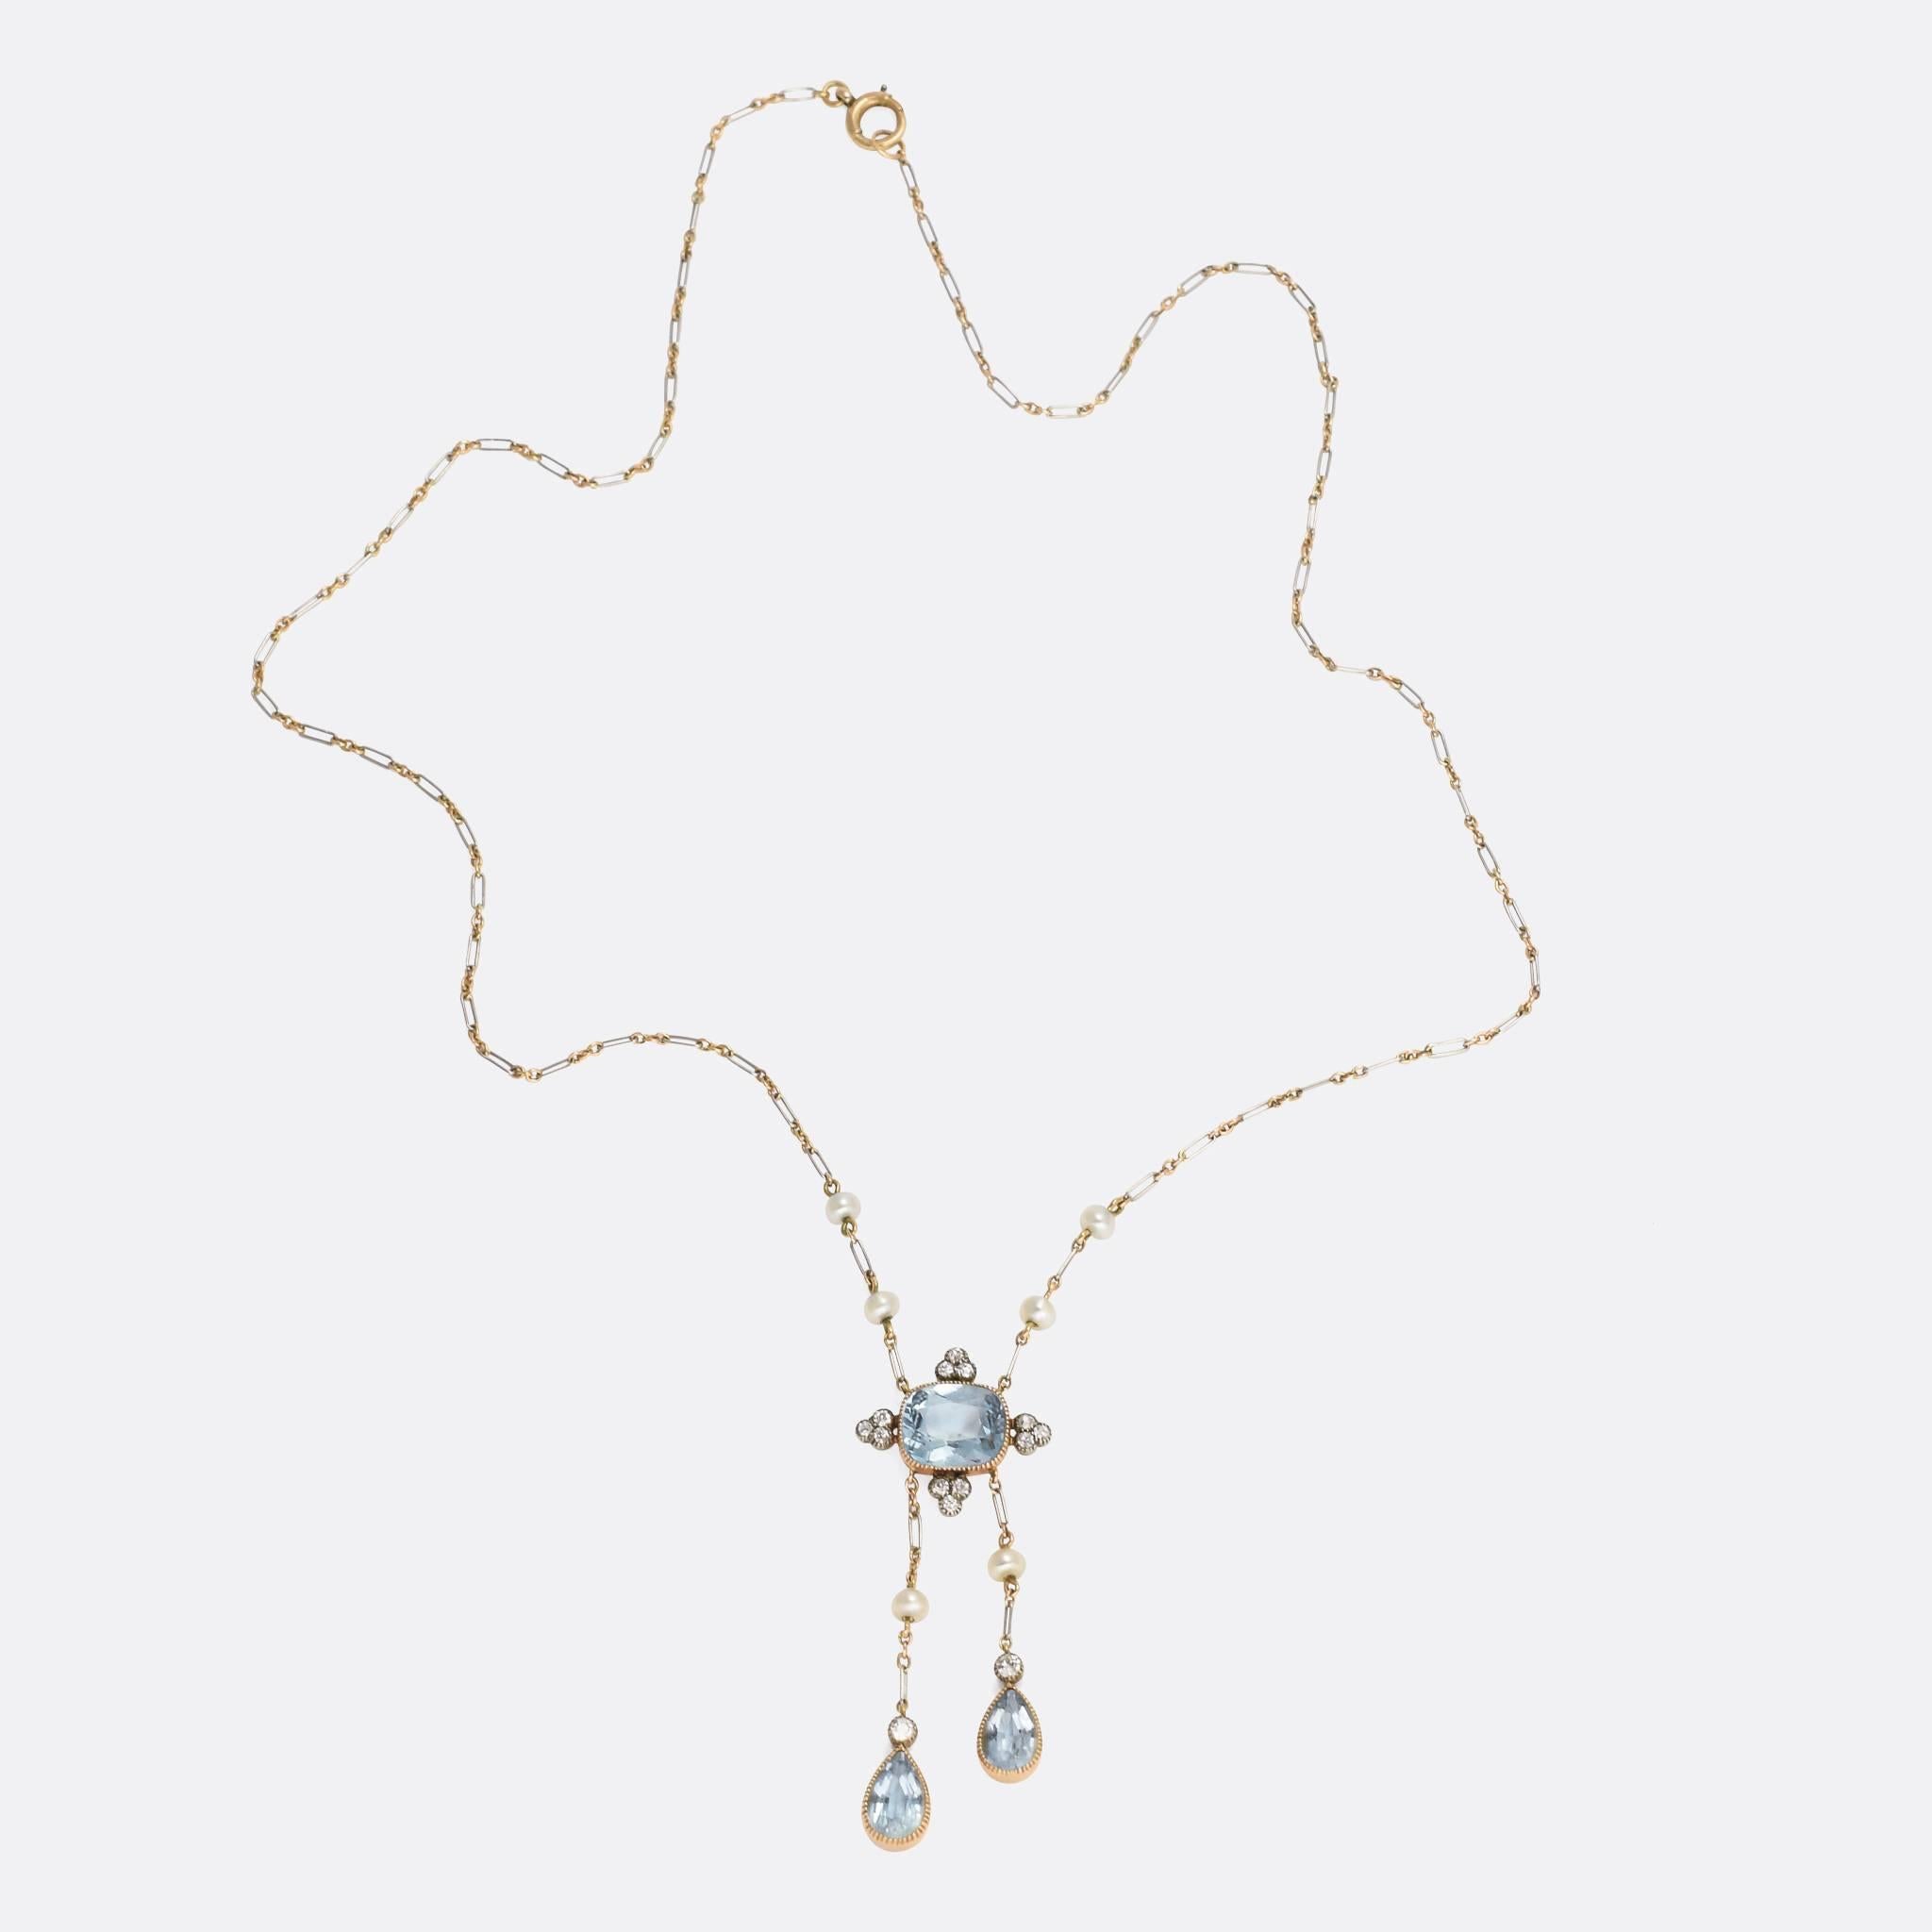 Typically Edwardian, with alternating Platinum and 18ct gold links. The principal aquamarine is surrounded by four diamond trefoils, hanging beneath, an aquamarine and diamond negligee drop and further accented by six natural pearls. Such a pretty